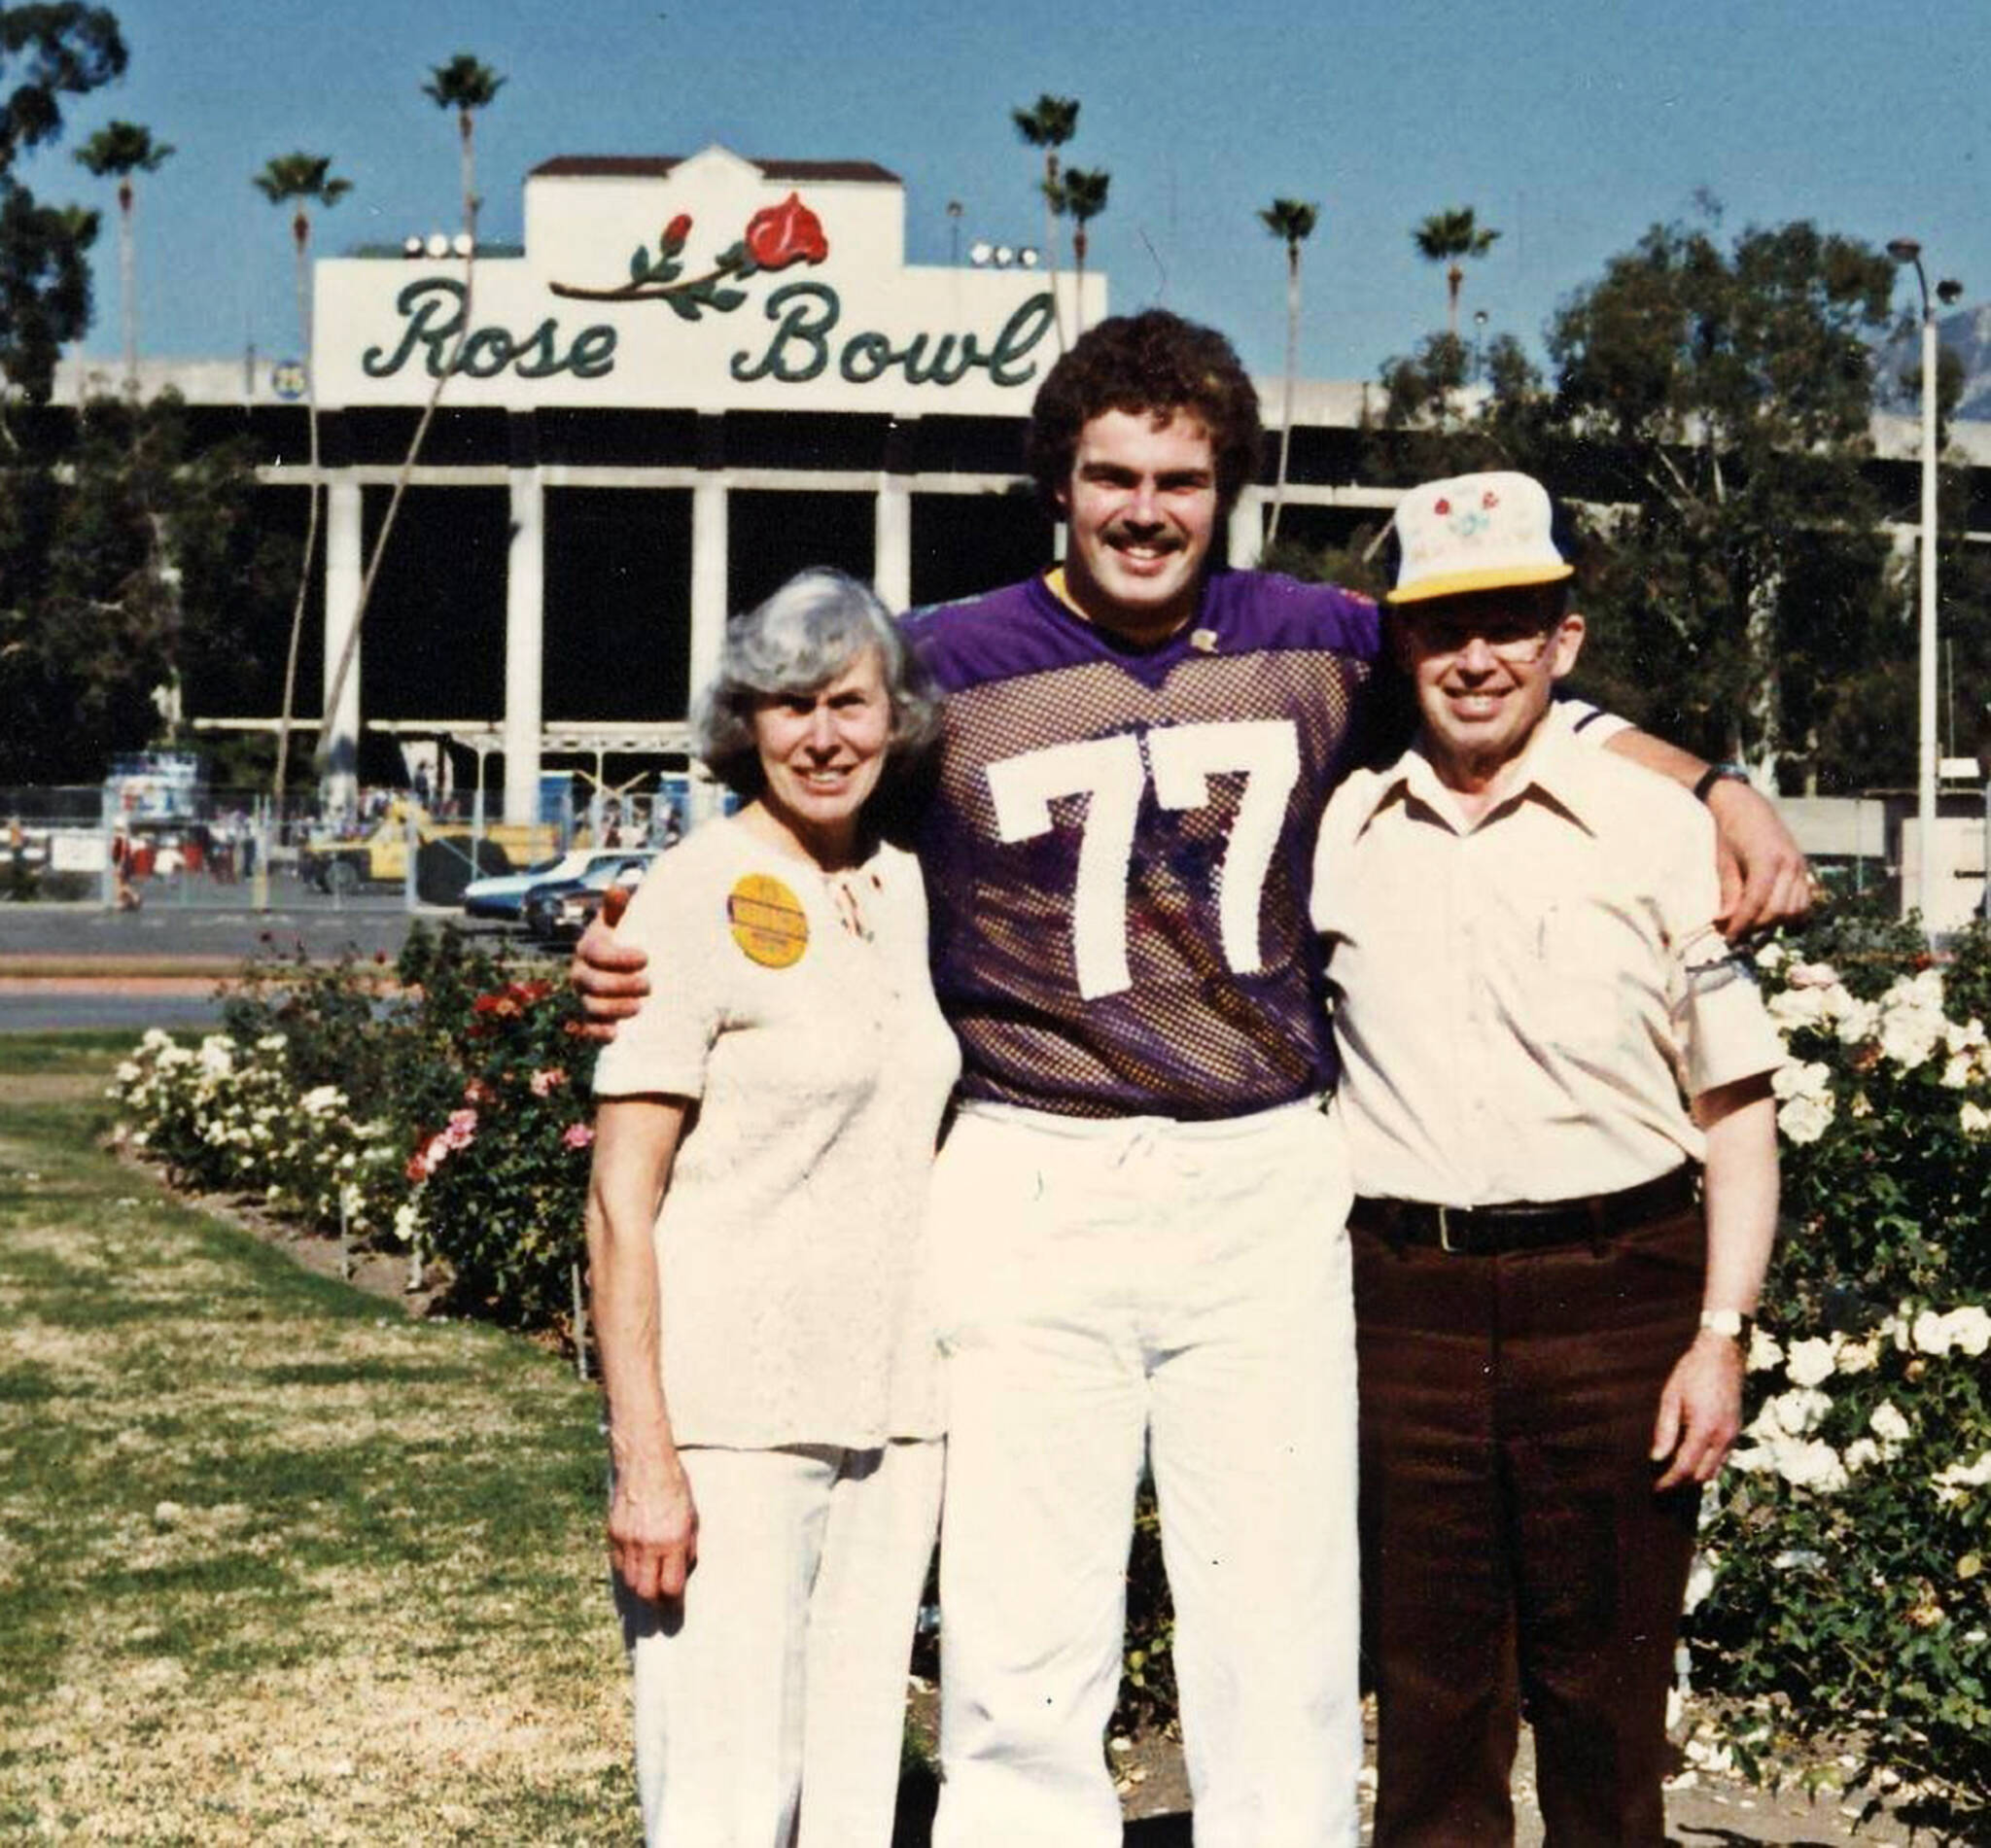 Courtesy photo
Don Dow played offensive line for University of Washington during the early 1980s.